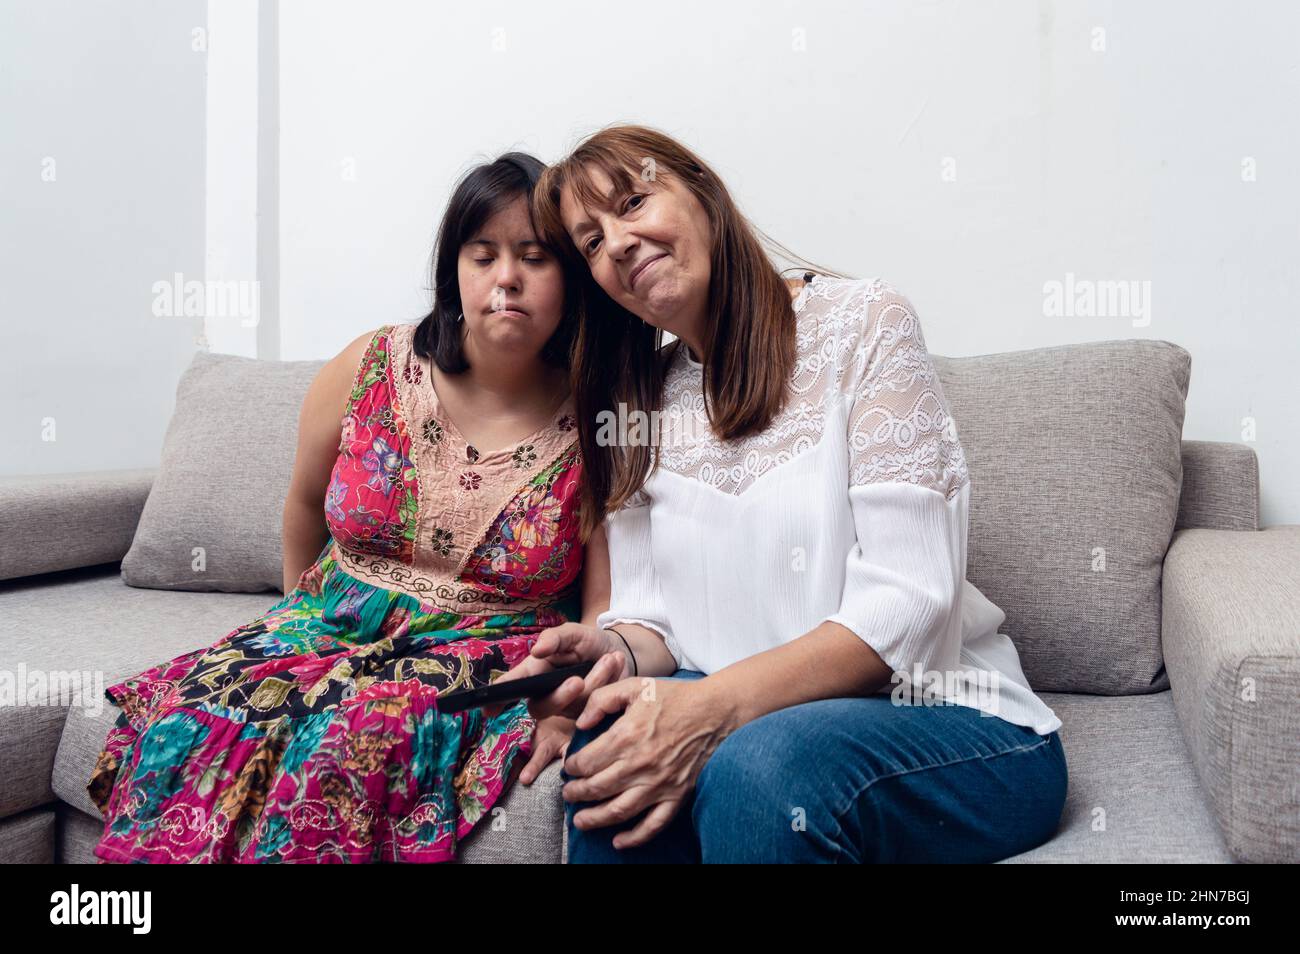 Caucasian Hispanic Latina Mom And Daughter Together Sitting On A Sofa Inside The House With